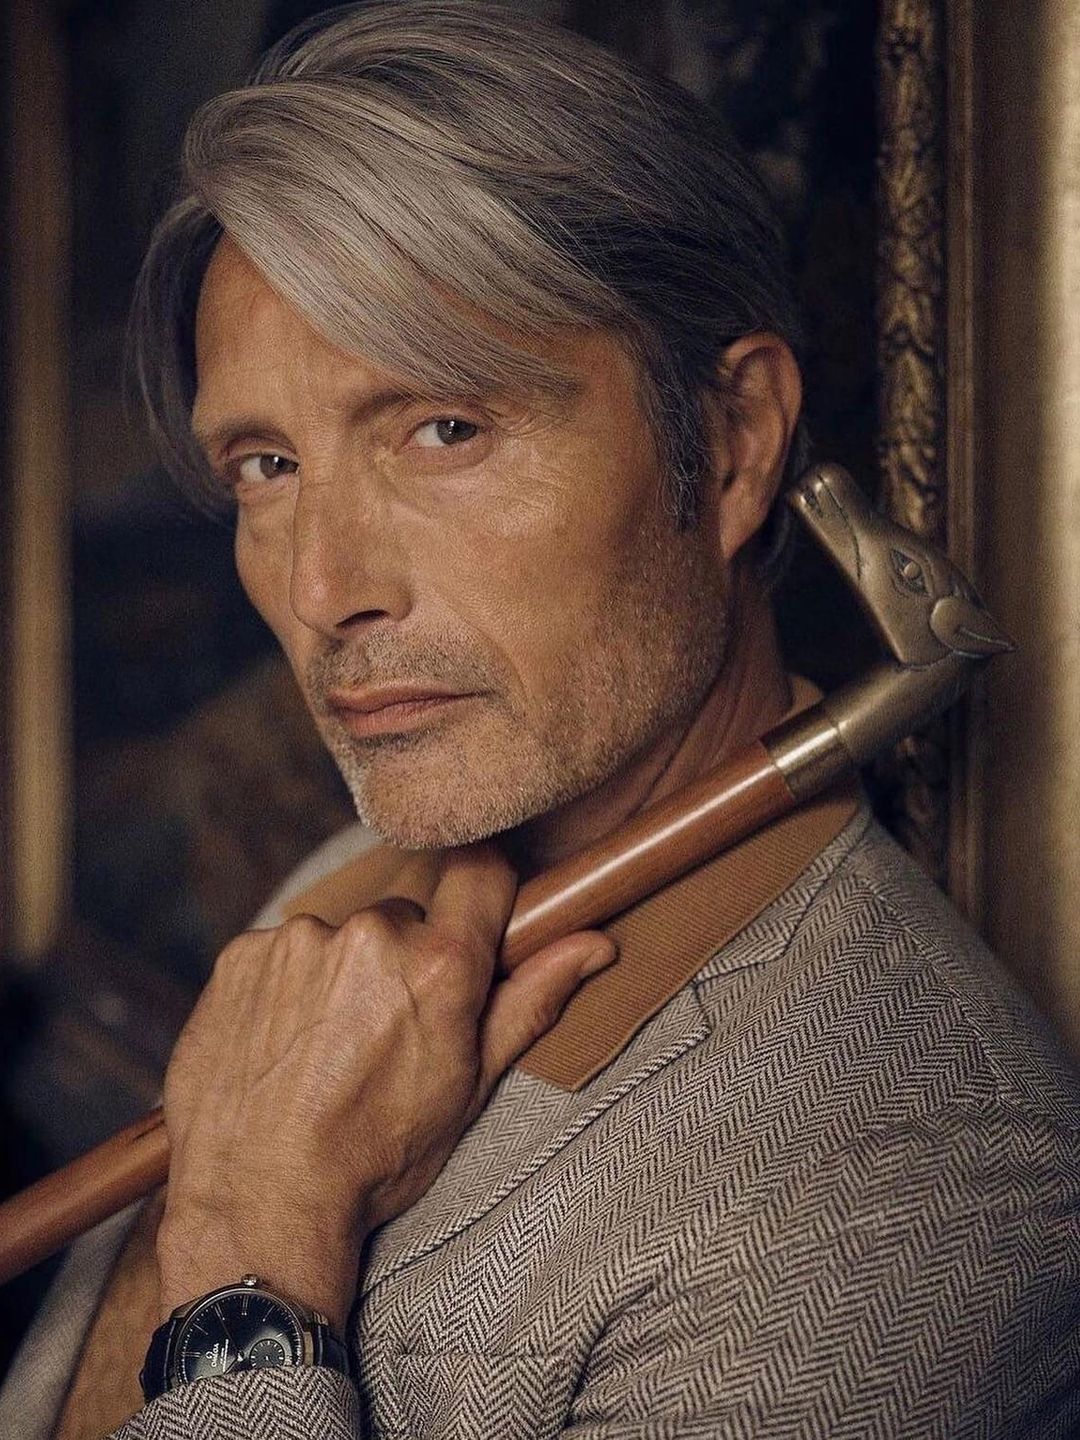 Mads Mikkelsen personal traits